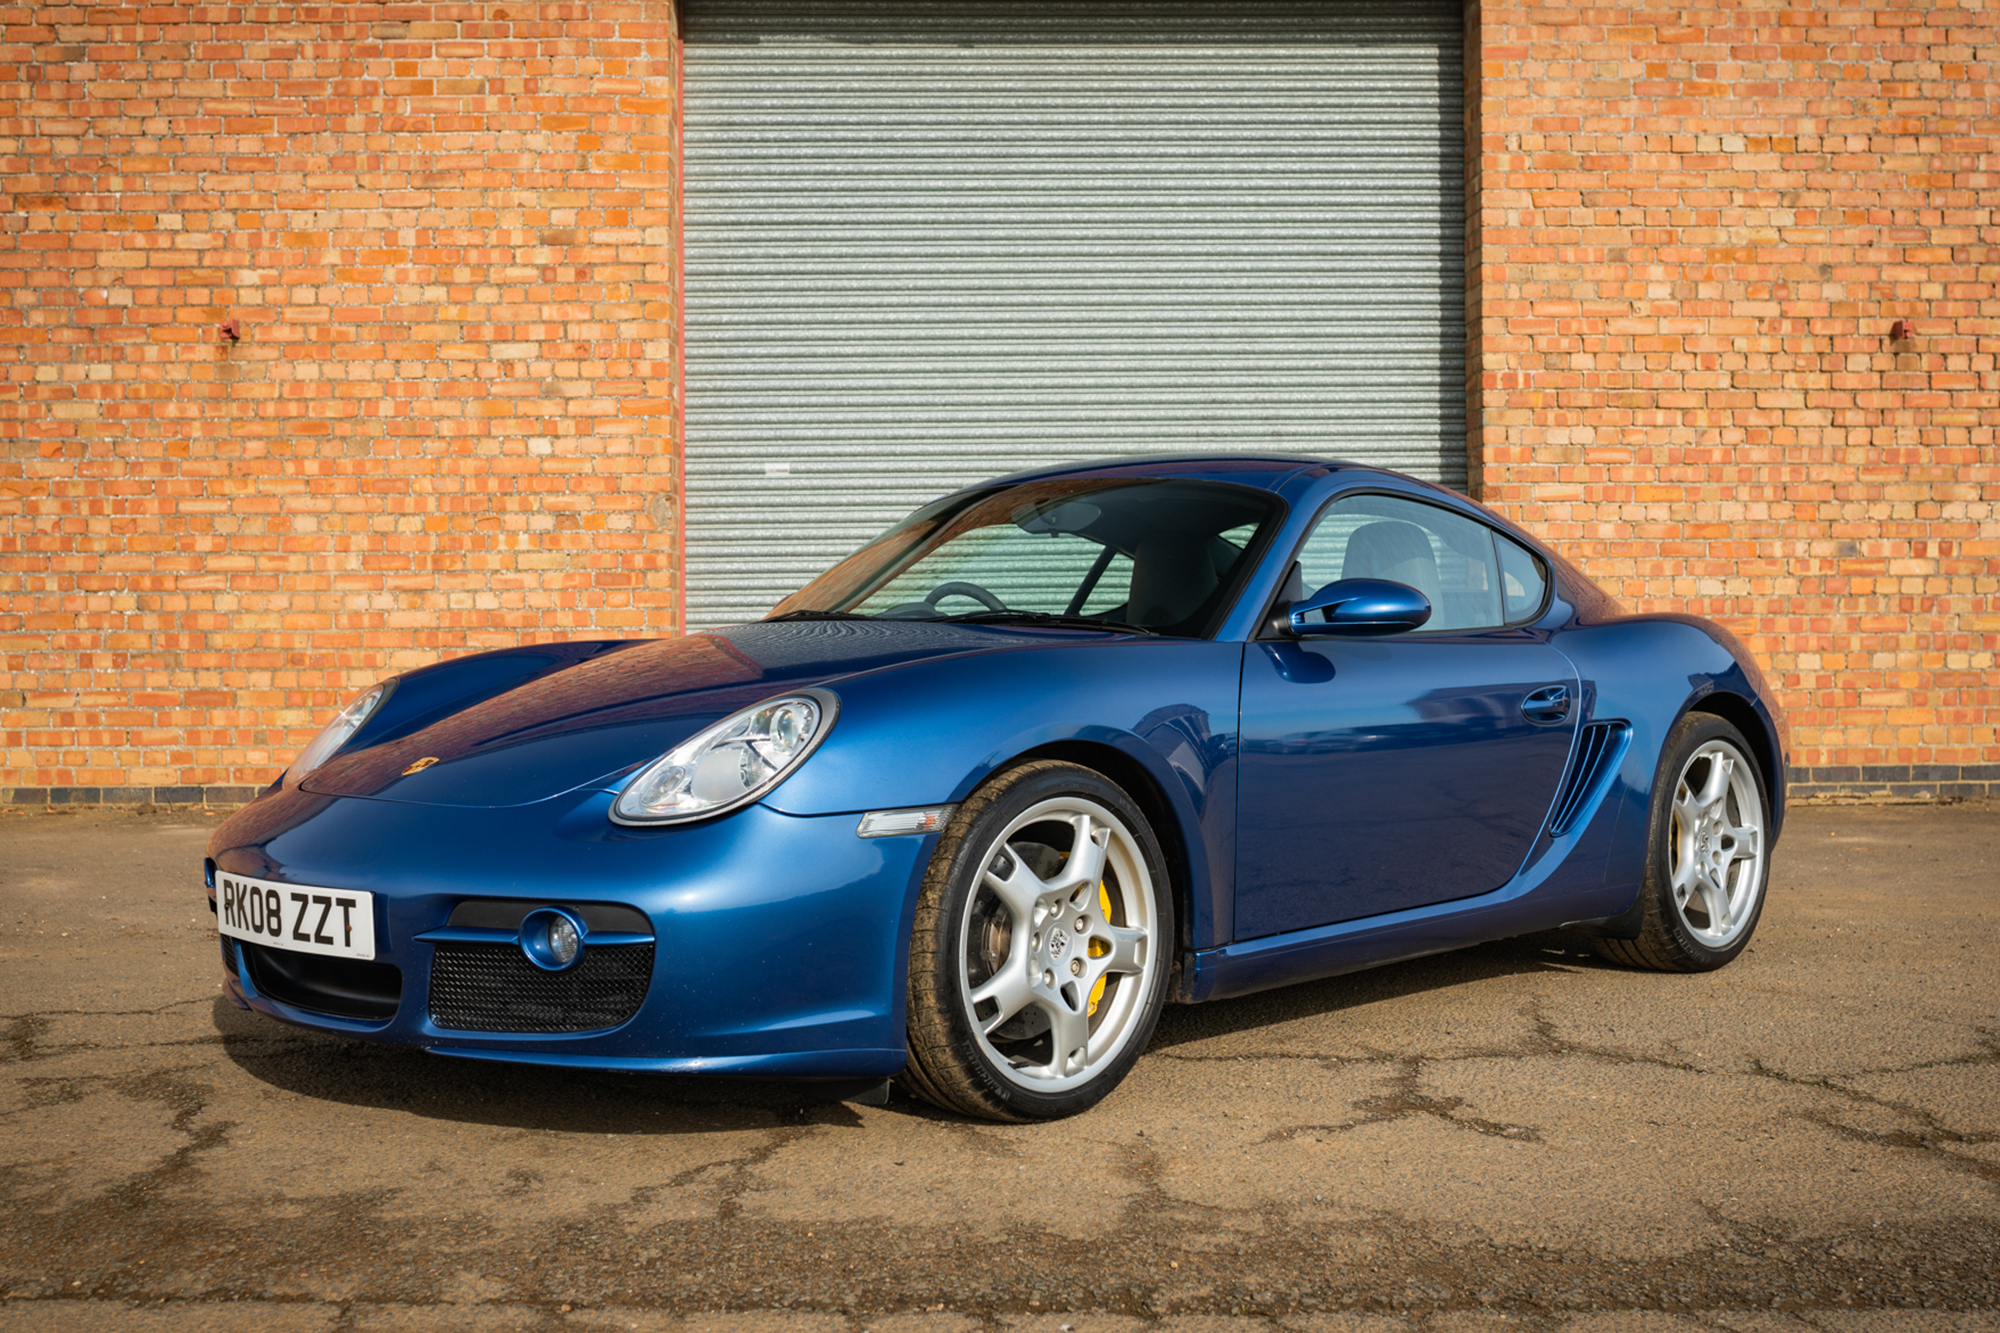 2008 PORSCHE (987) CAYMAN S for sale by auction in Grantham, Lincolnshire, United Kingdom pic